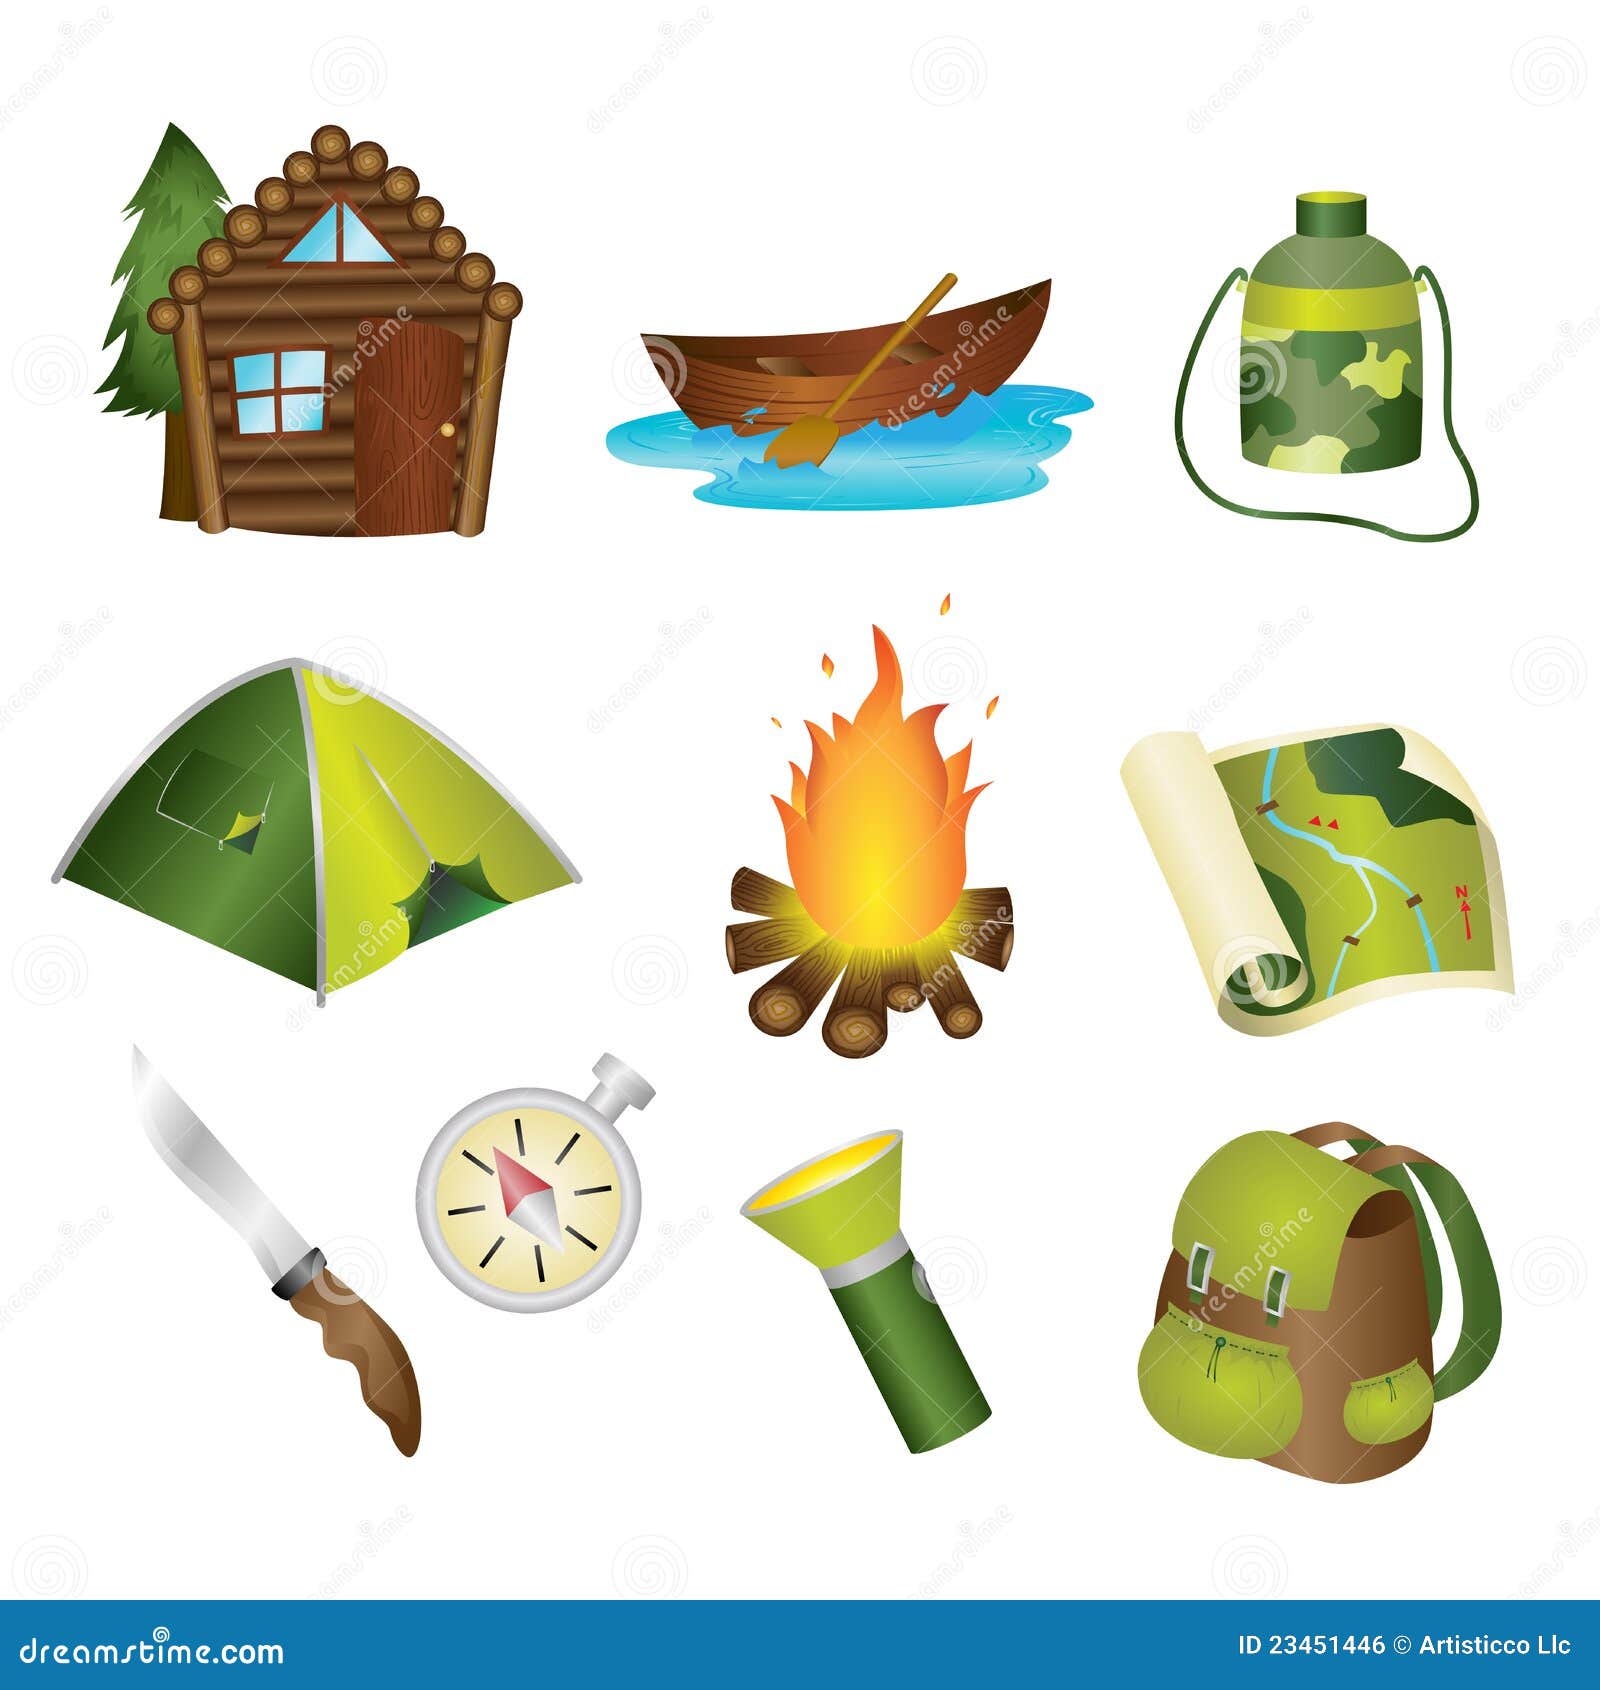 camping clipart free download - photo #19